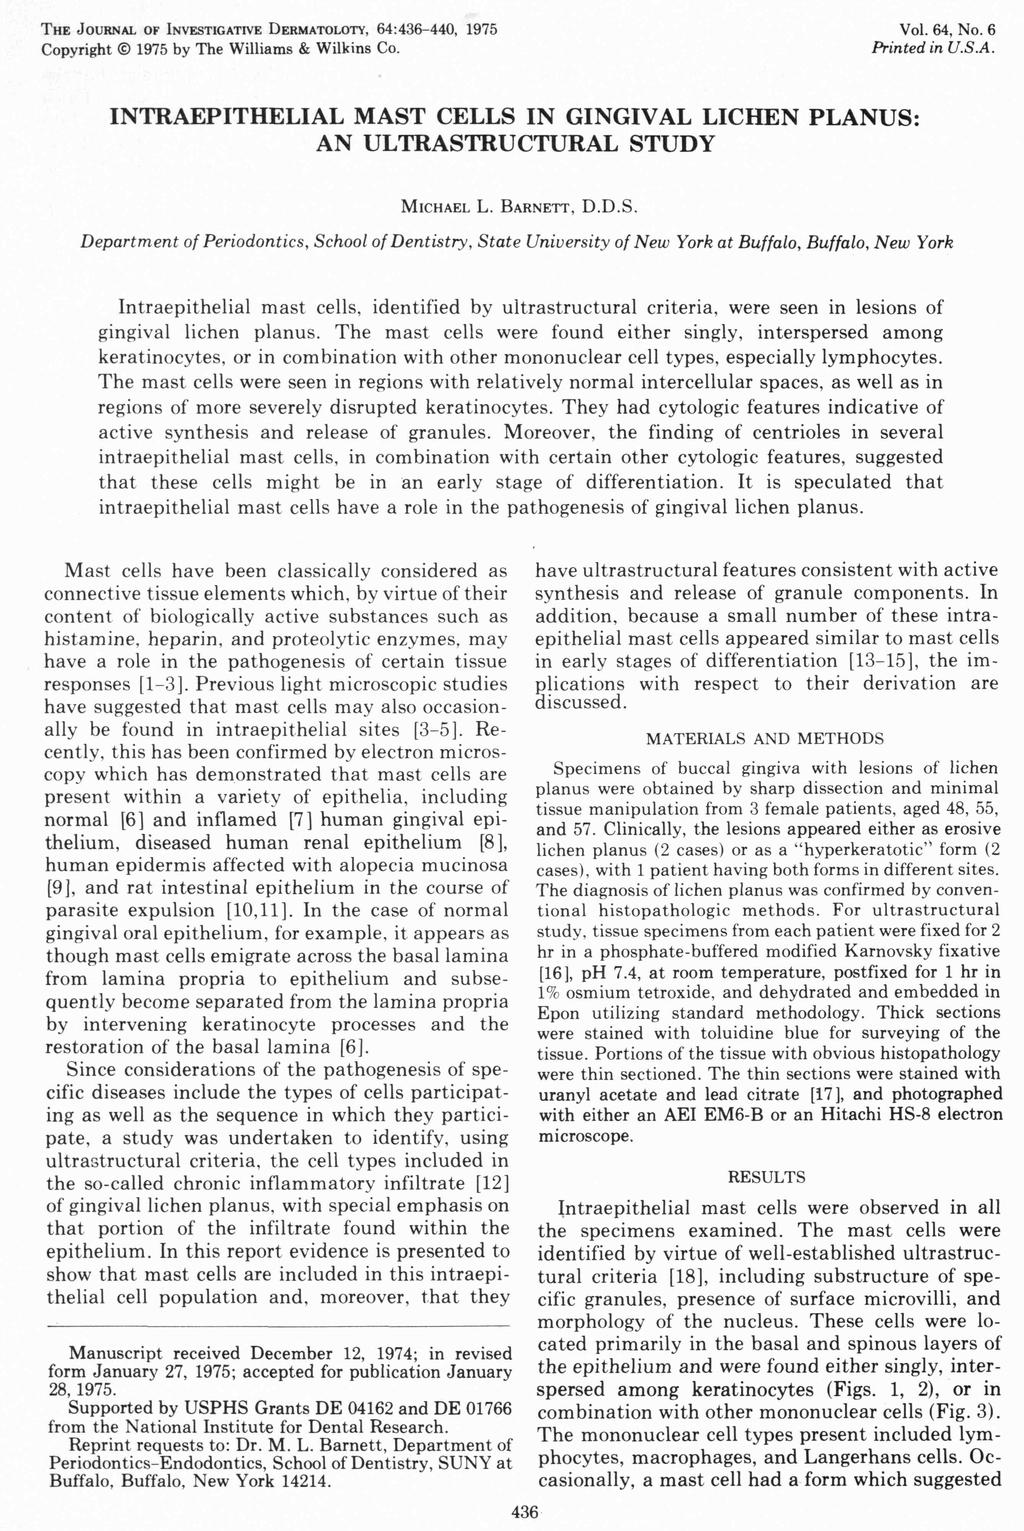 THE JOURNAL OF INVESTIGATIVE DERMATOLOTY, 64:436-440, 1975 Copyright 1975 by The Williams & Wilkins Co. Vol. 64, No.6 Printed in U.S.A. INTRAEPITHELIAL MAST CELLS IN GINGIVAL LICHEN PLANUS: AN ULTRASTRUCTURAL STUDY MICHAEL L.